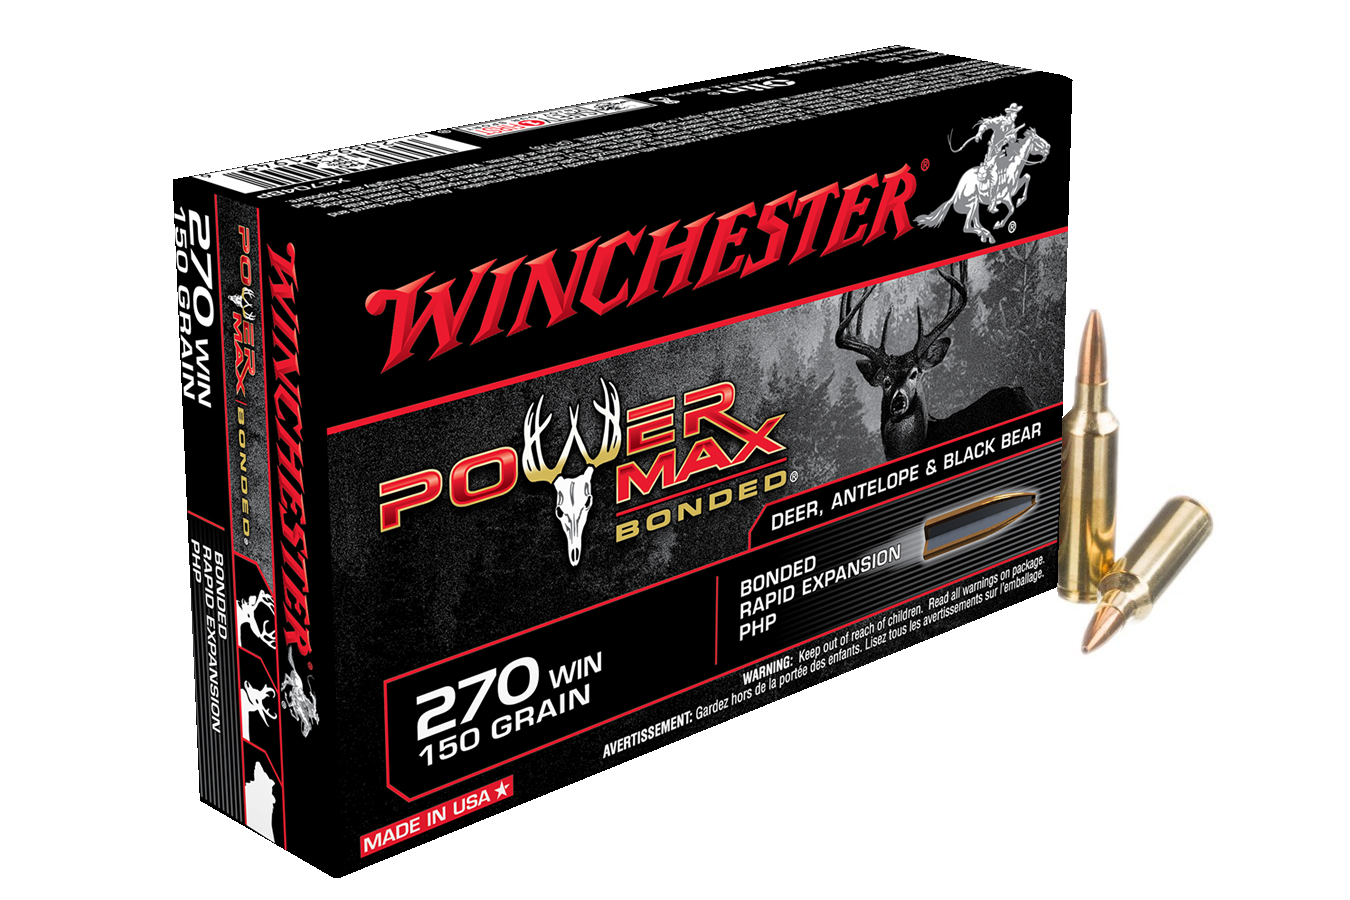 WINCHESTER AMMO 270 WIN 150 GR POWER MAX BONDED